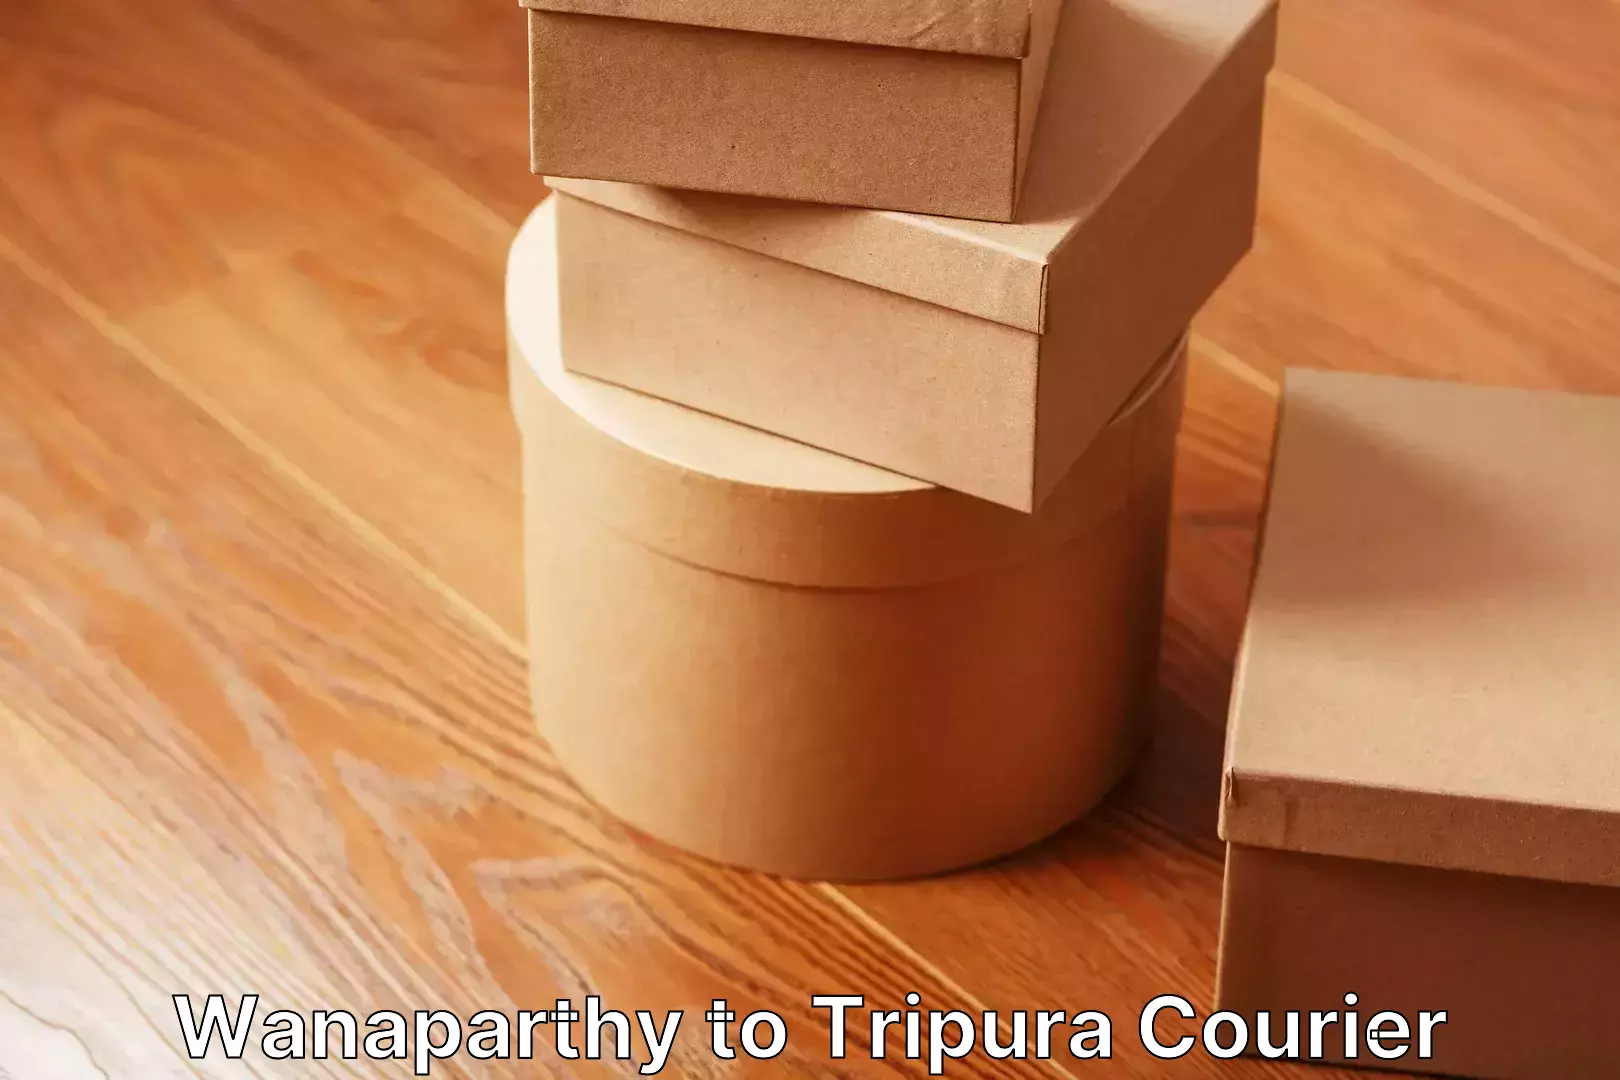 Trusted relocation experts Wanaparthy to Tripura